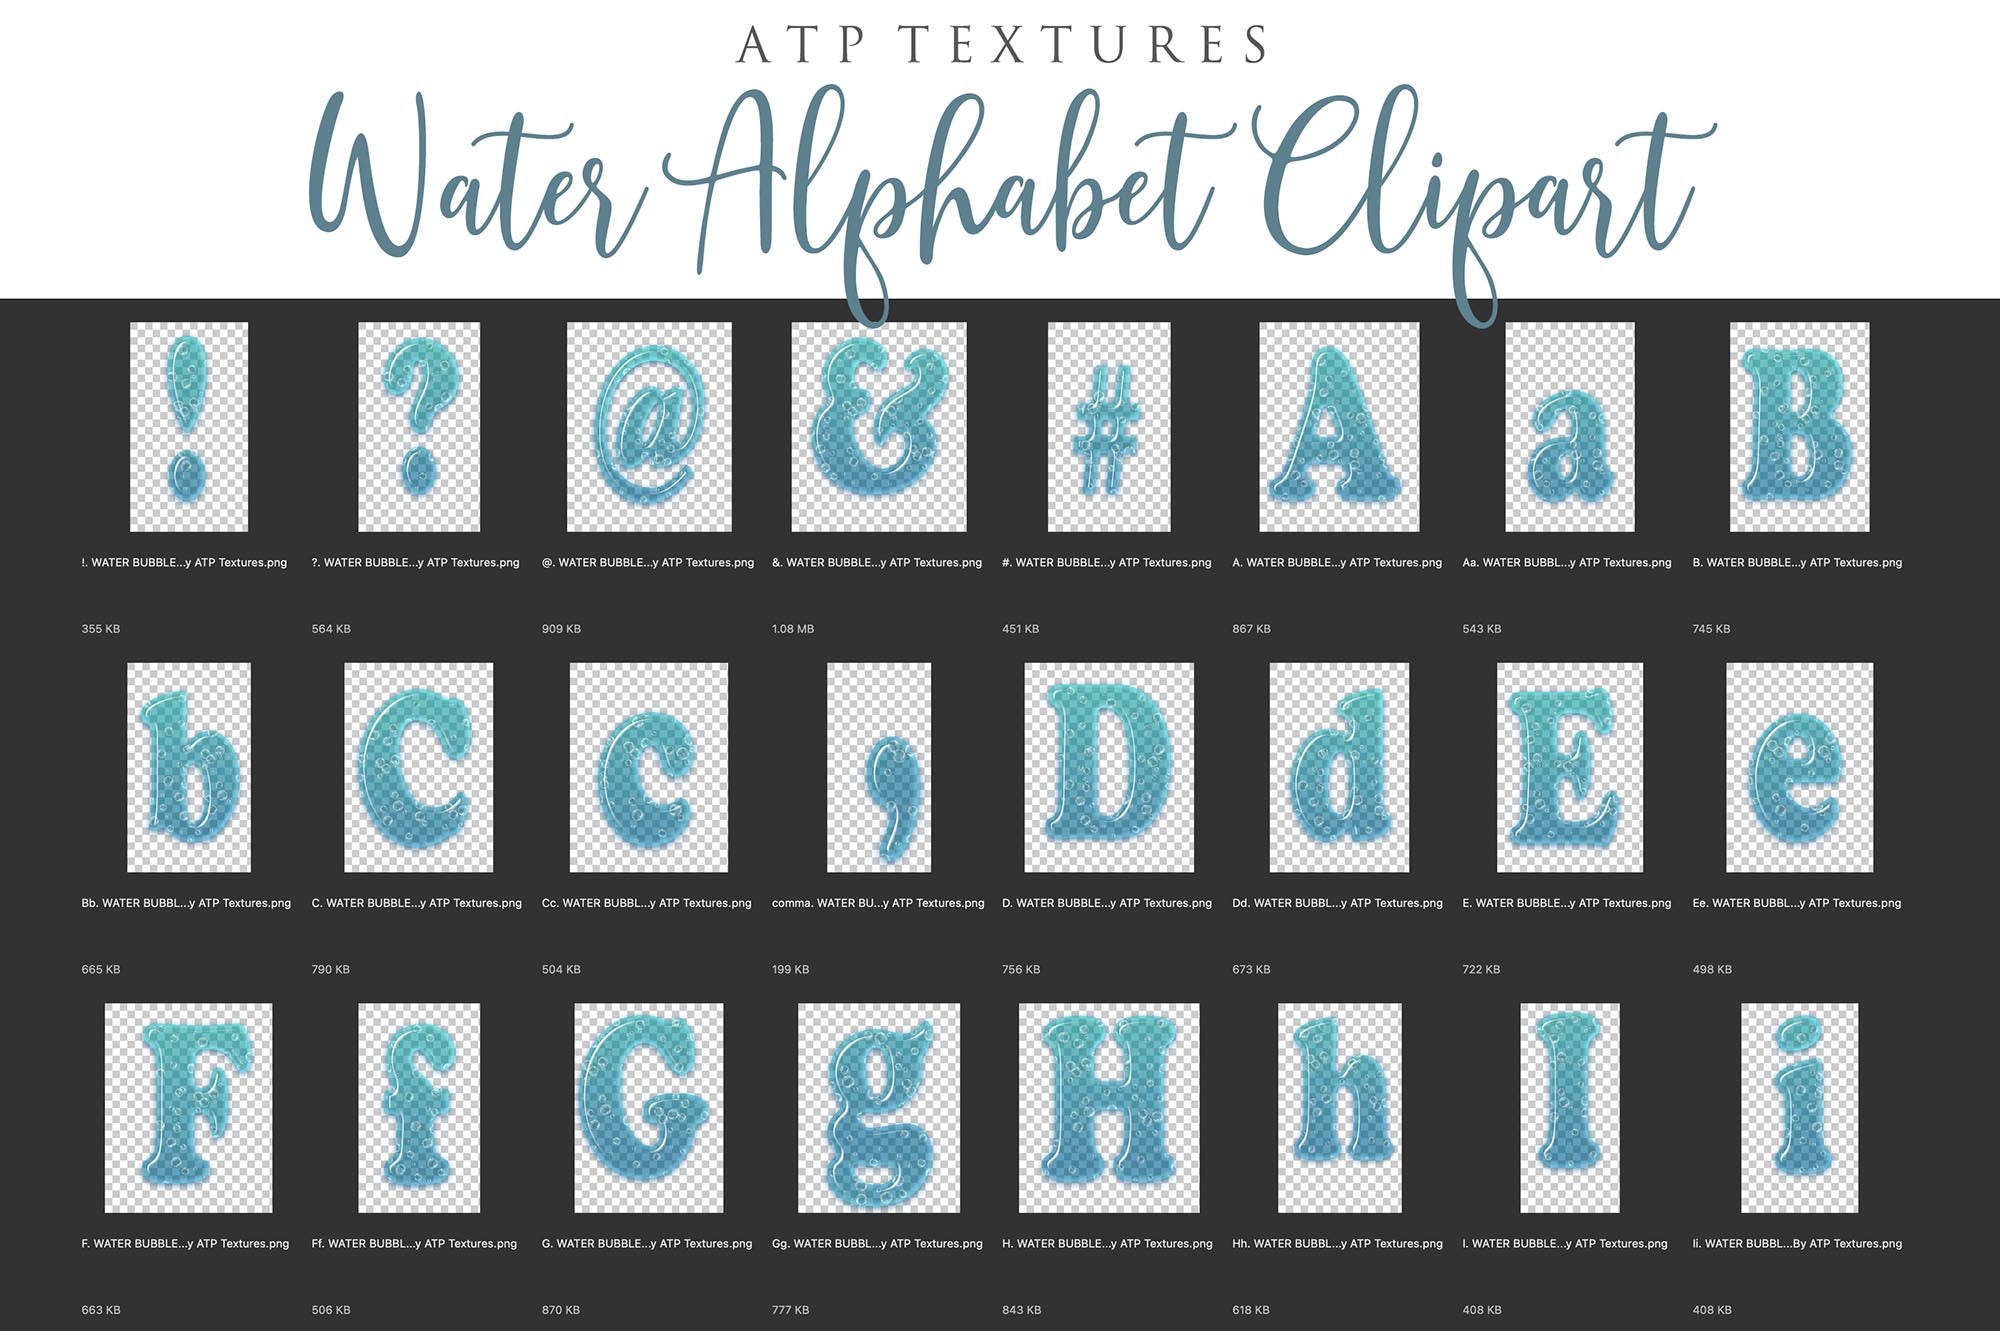 Water Bubble LETTERS & NUMBERS - Clipart